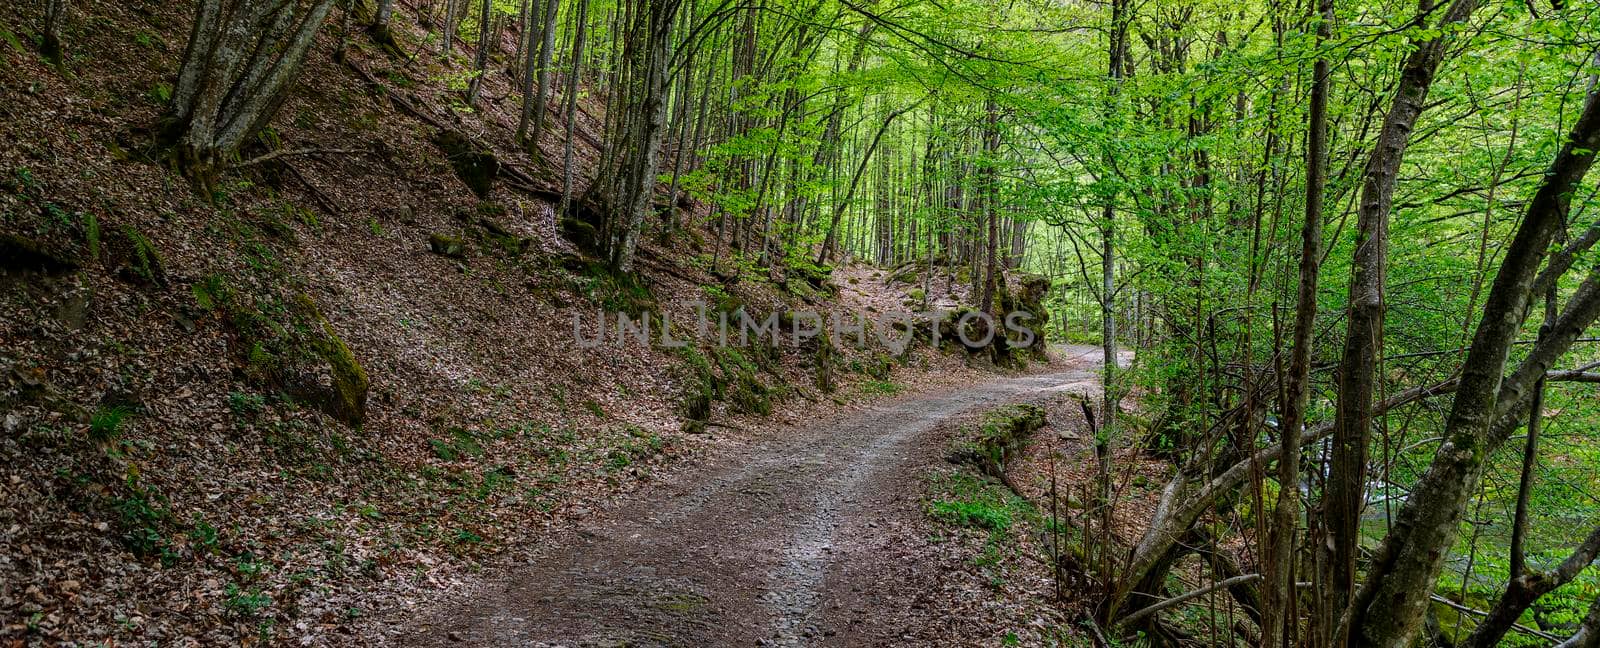 walkway road in a wild forest in mountain